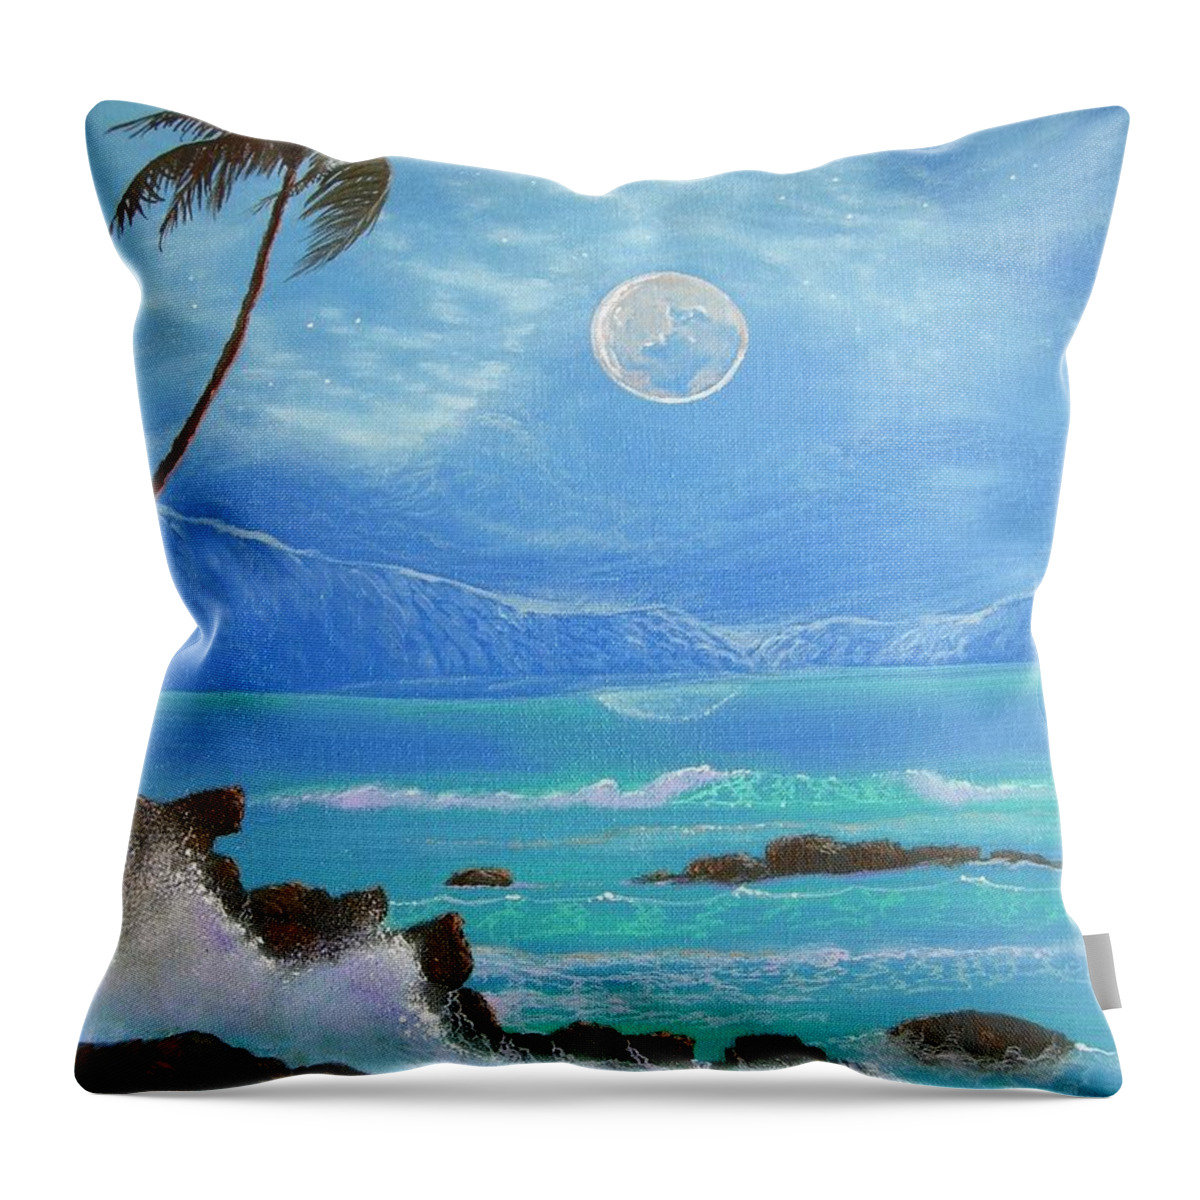 Hawaii Seascape Throw Pillow featuring the painting Hawaii Night Seascape by Leland Castro